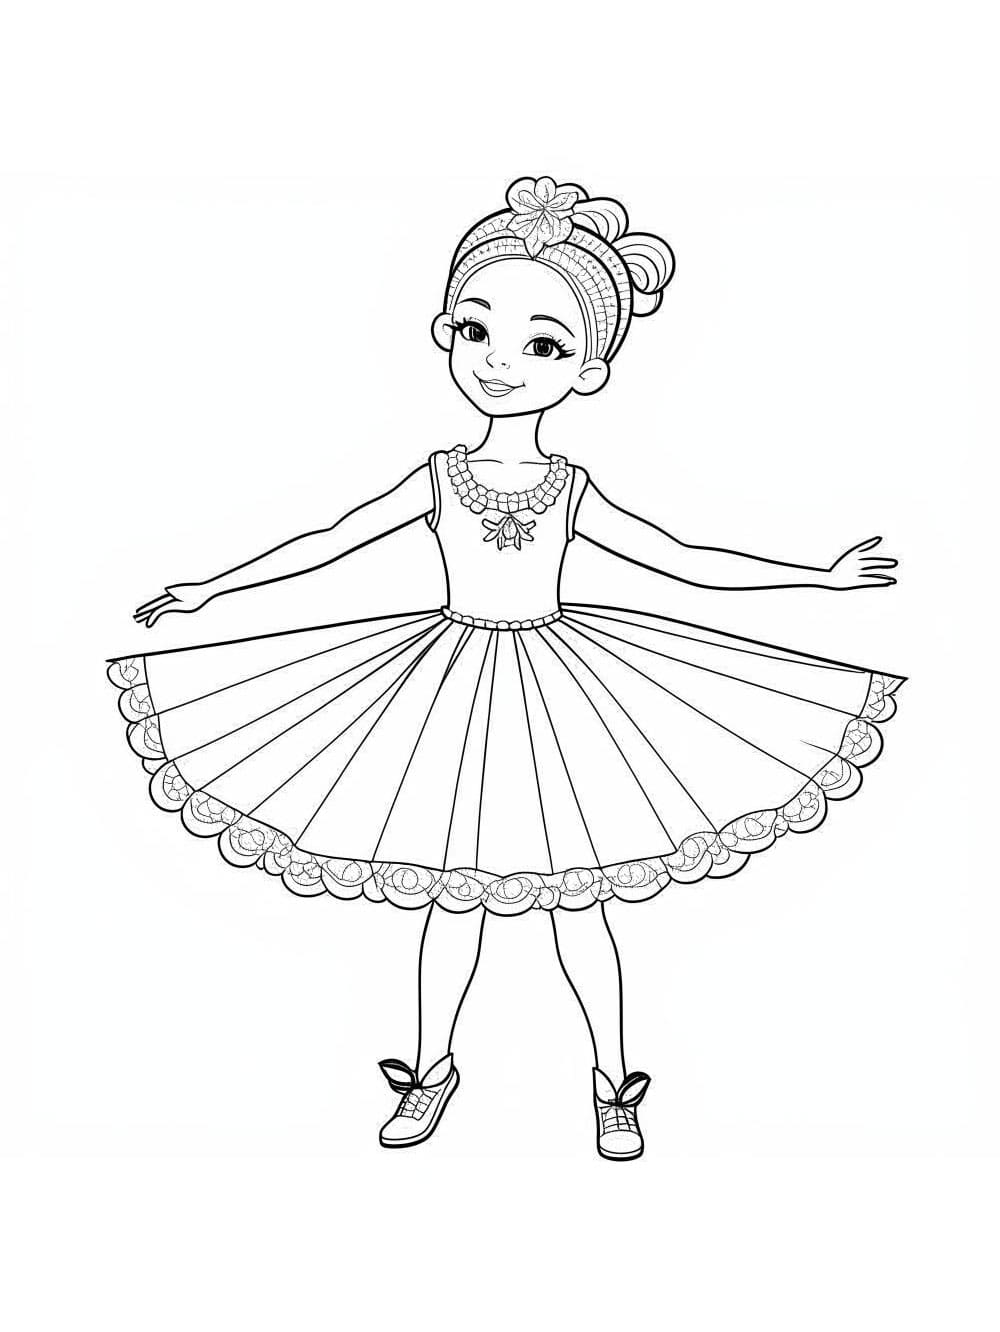 Little Ballerina Girl coloring page - Download, Print or Color Online ...